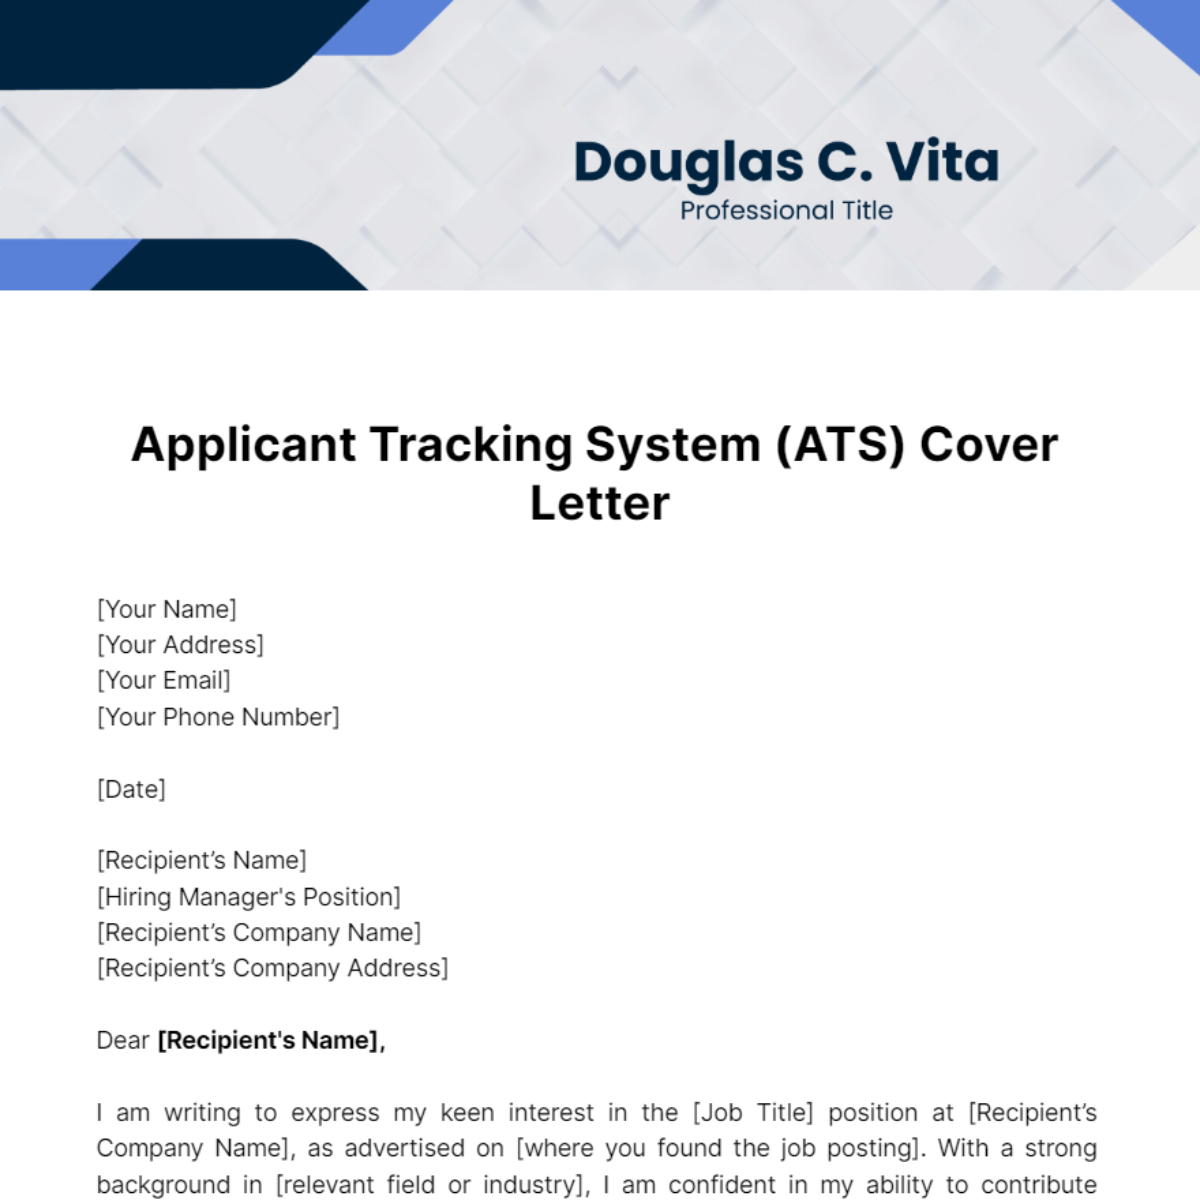 Applicant Tracking System (ATS) Cover Letter Template